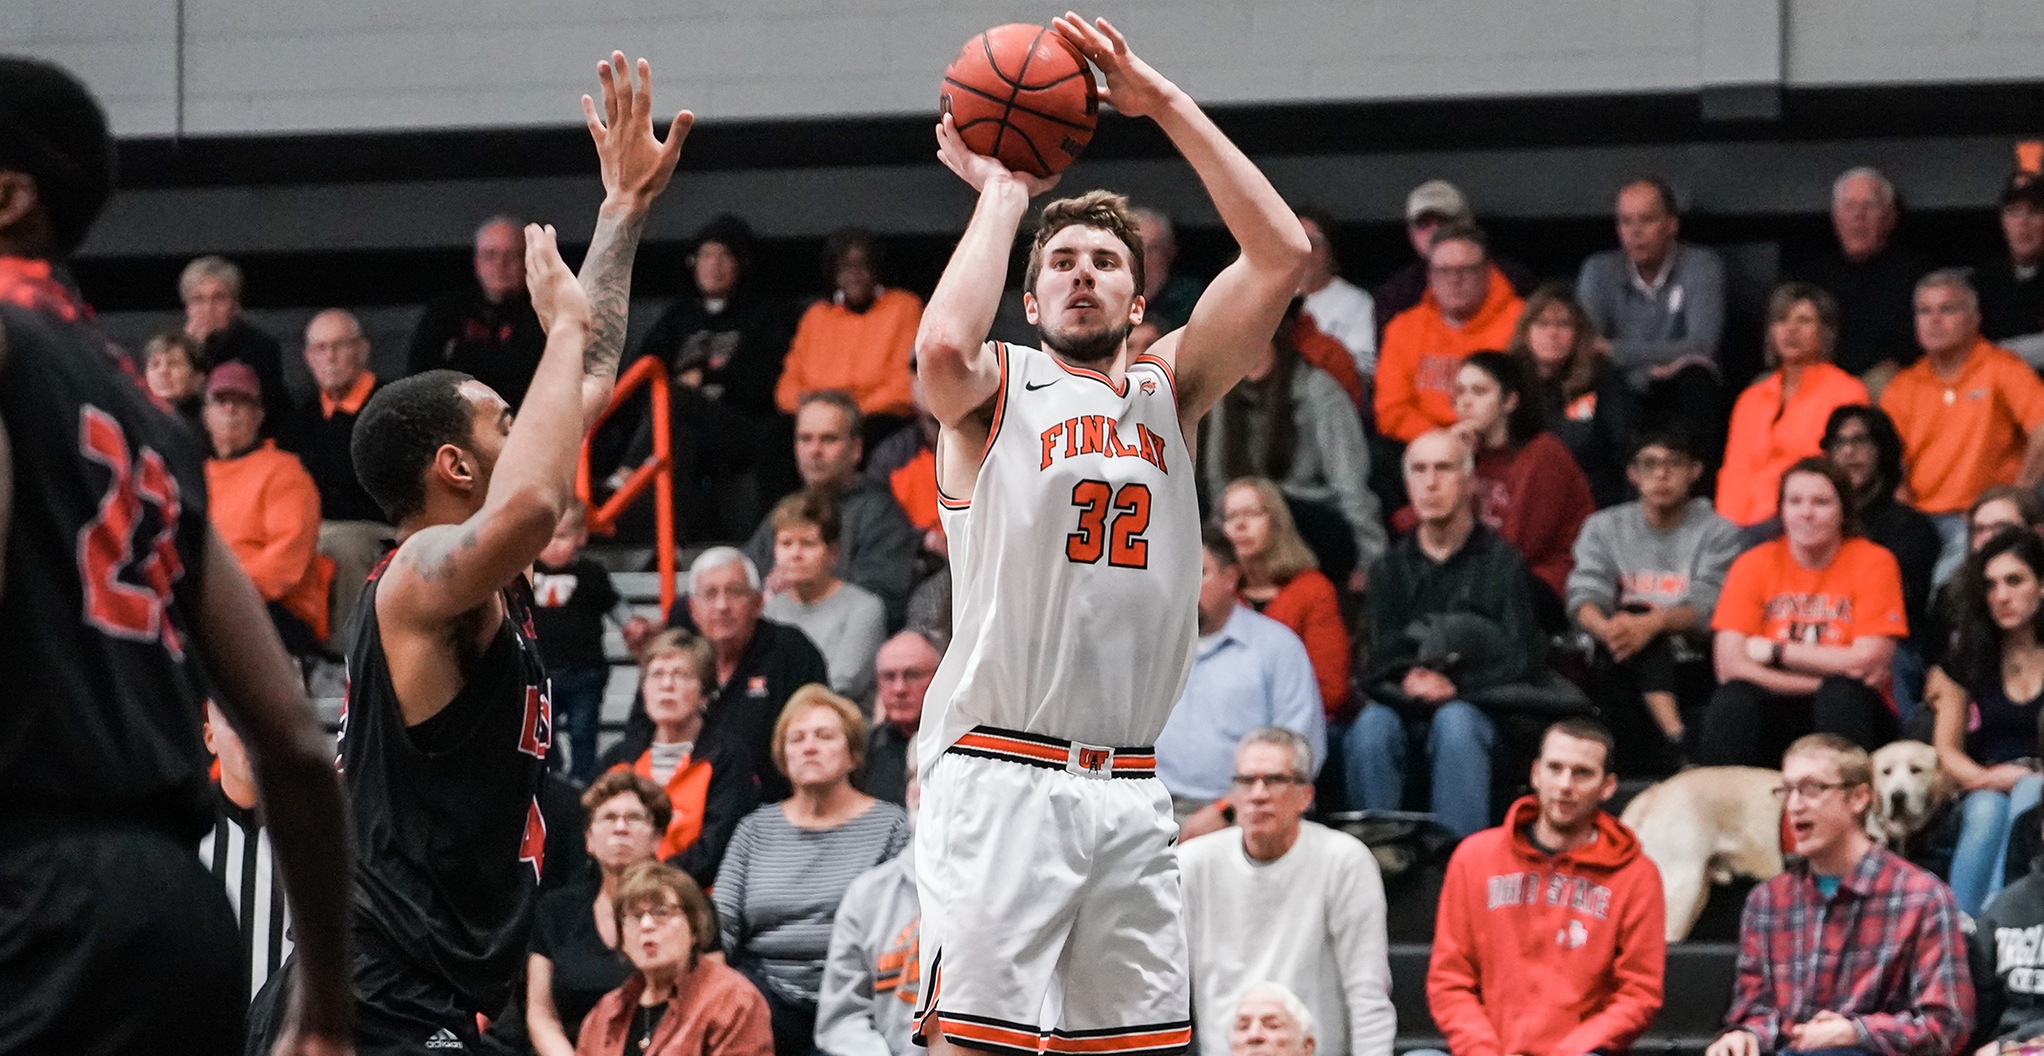 Oilers Fall Short at Hillsdale